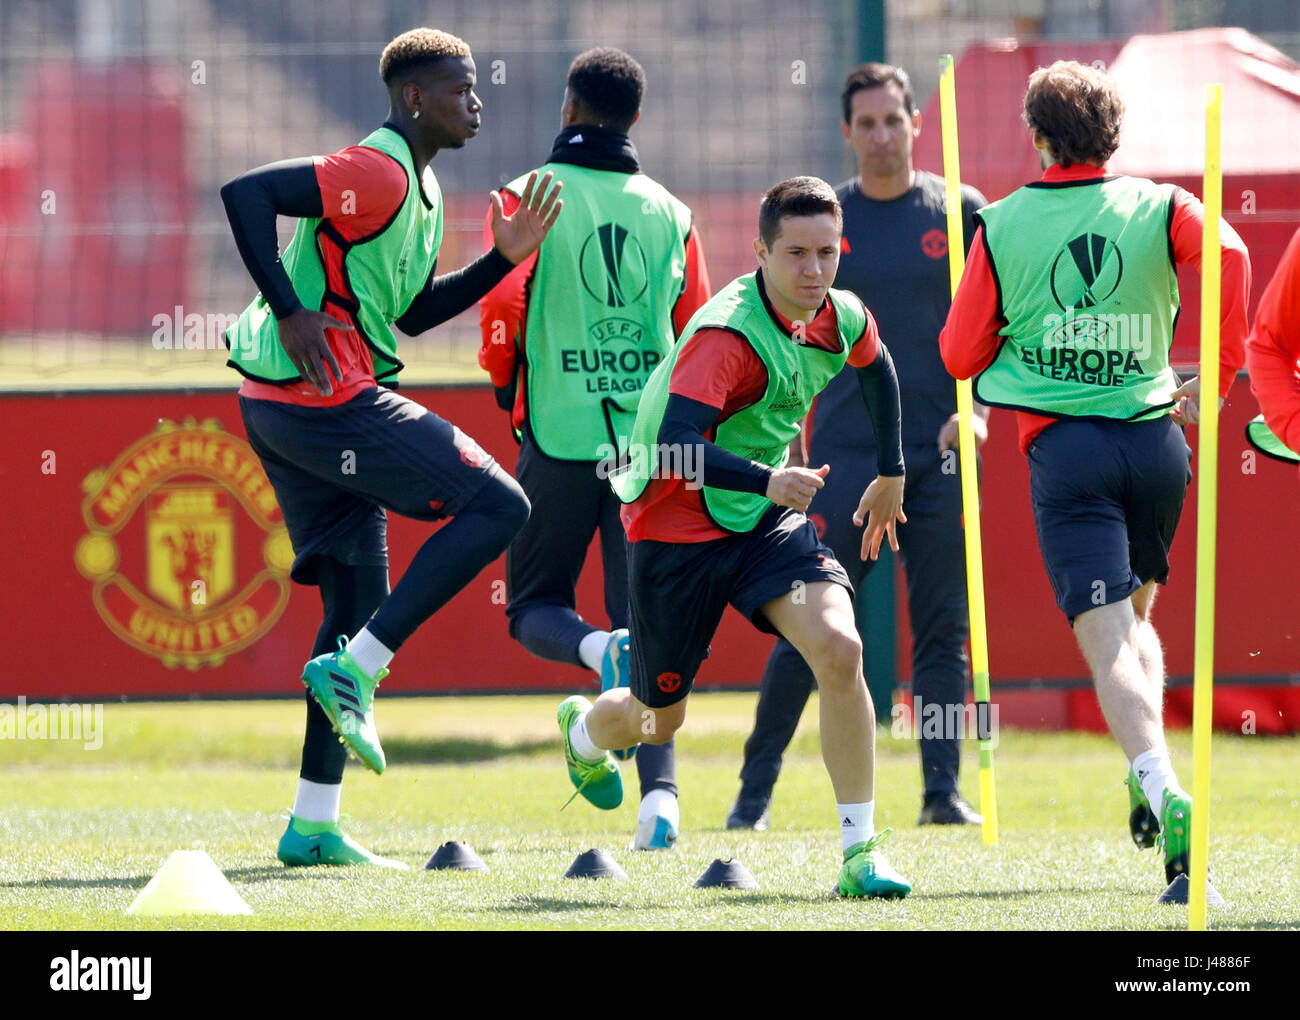 Manchester United's Ander Herrera during the training session at the AON Training Complex, Carrington. PRESS ASSOCIATION Photo. Picture date: Wednesday May 10, 2017. See PA story soccer Man Utd. Photo credit should read: Martin Rickett/PA Wire Stock Photo